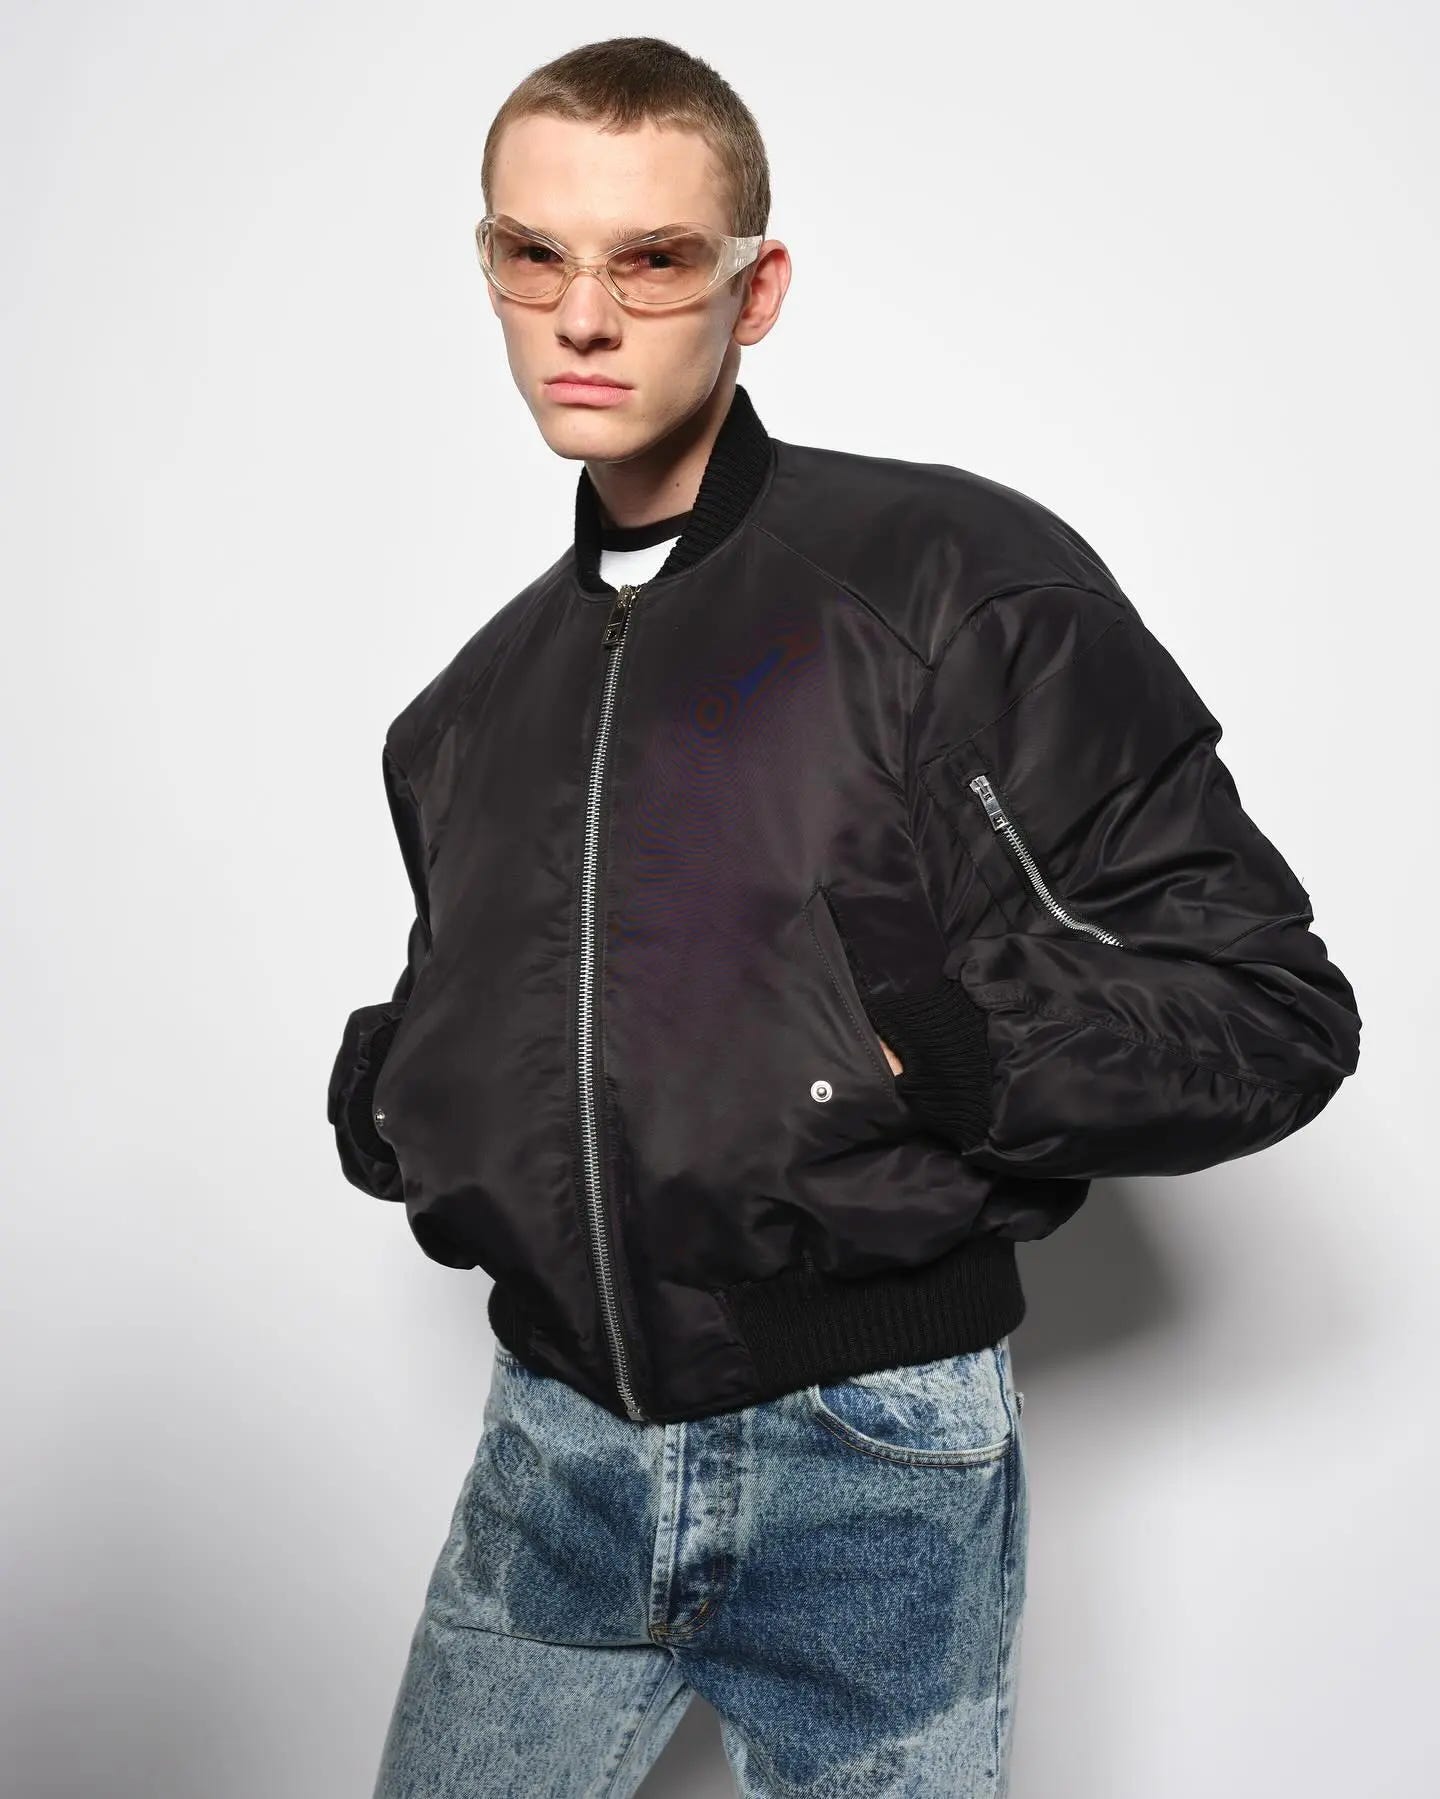 A guy in a black bomber jacket wearing light denim. The crotch of the denim is dark, making it look wet -- nearly all the way up to the pockets. Also he's wearing a pair of glasses that look like safety glasses. Modeling.